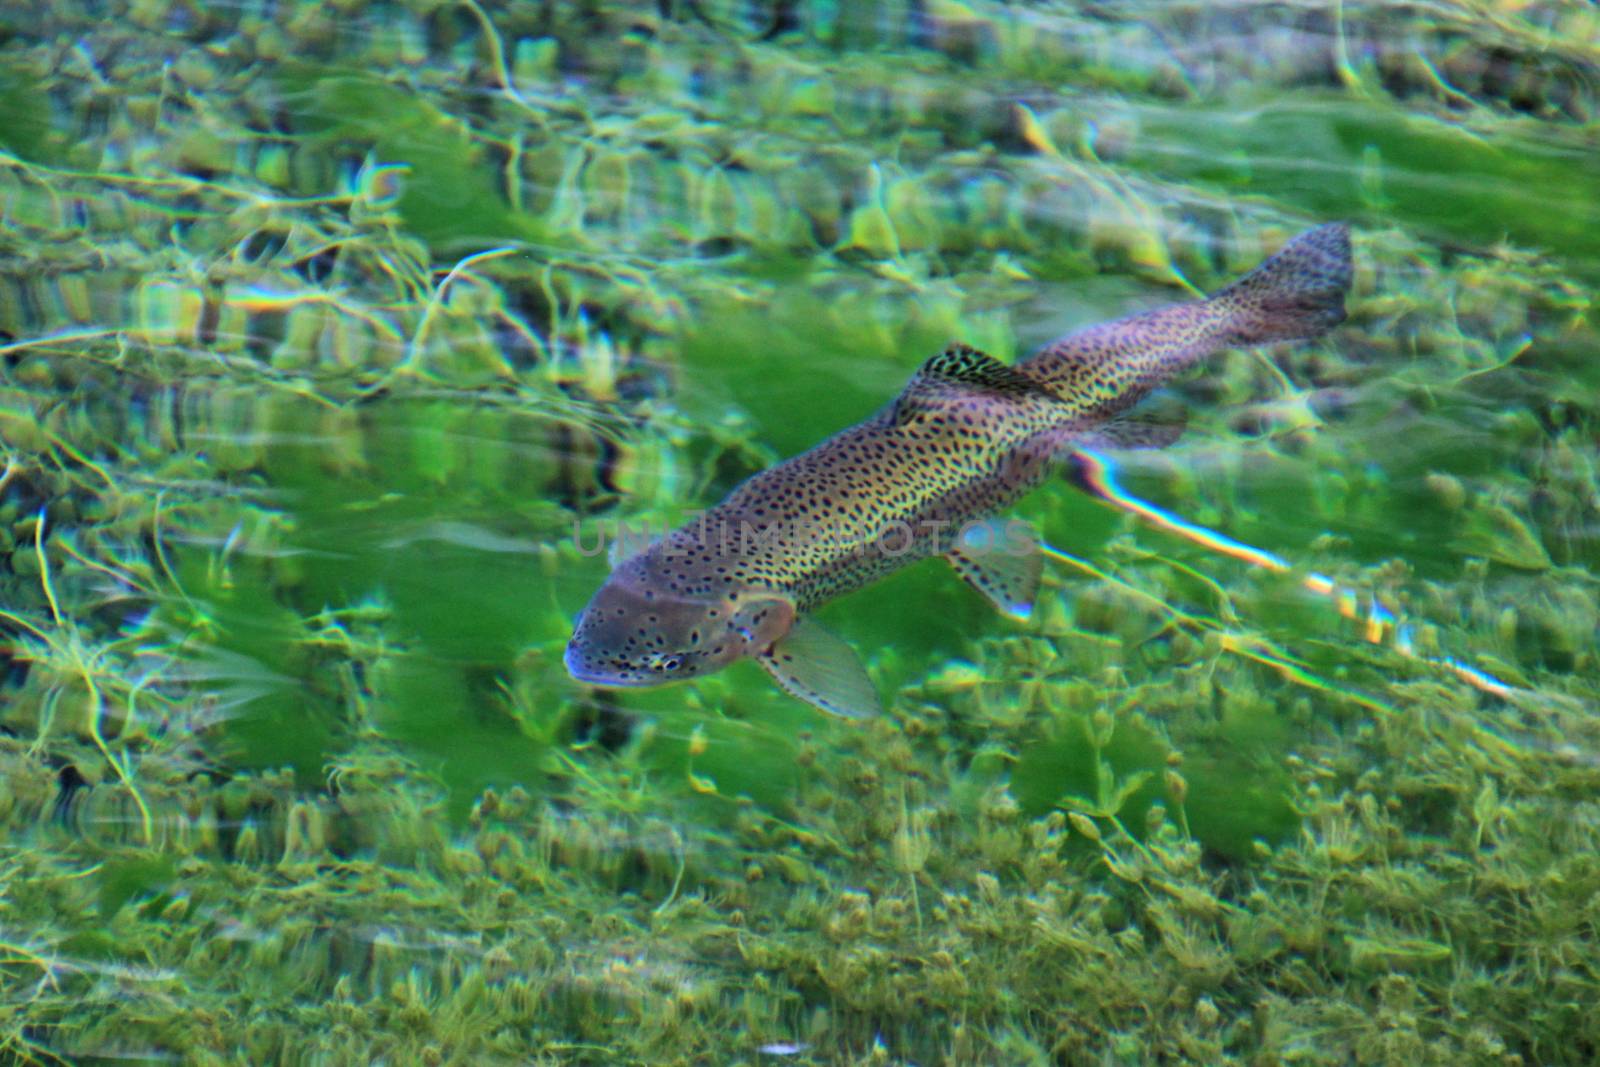 Rainbow trout in the water of the clear lake Laguna Nina Encantada, Argentina, not an underwater photo by cicloco